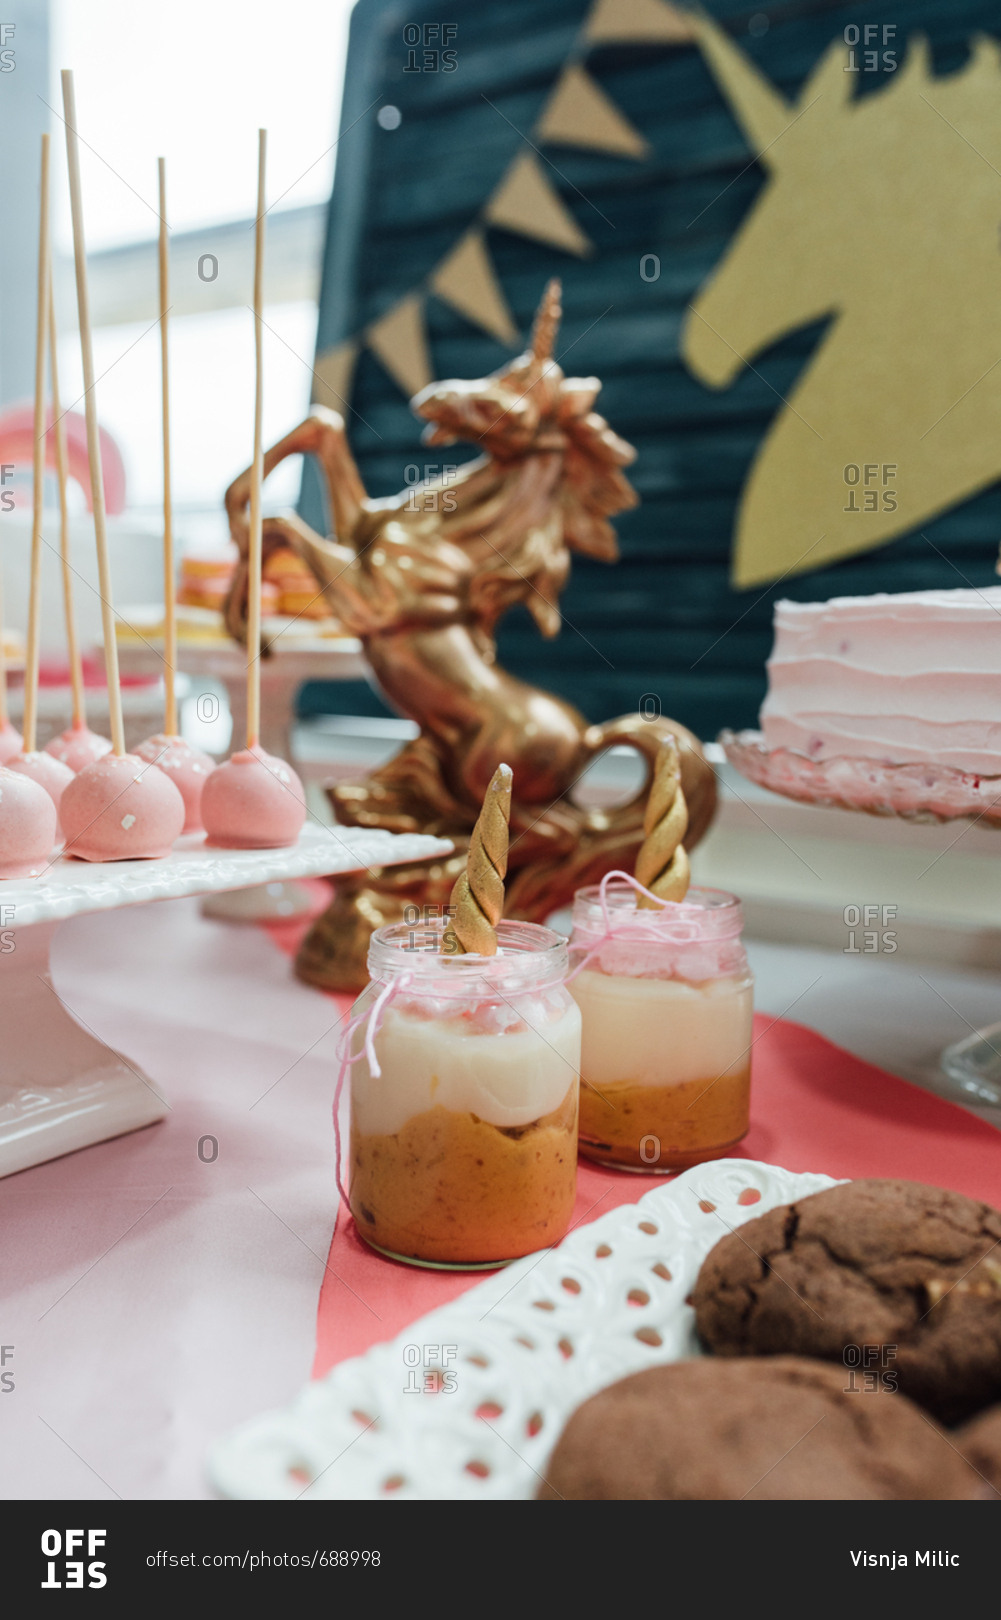 Unicorn themed sweet table with all kind of desserts and a golden unicorn sculpture